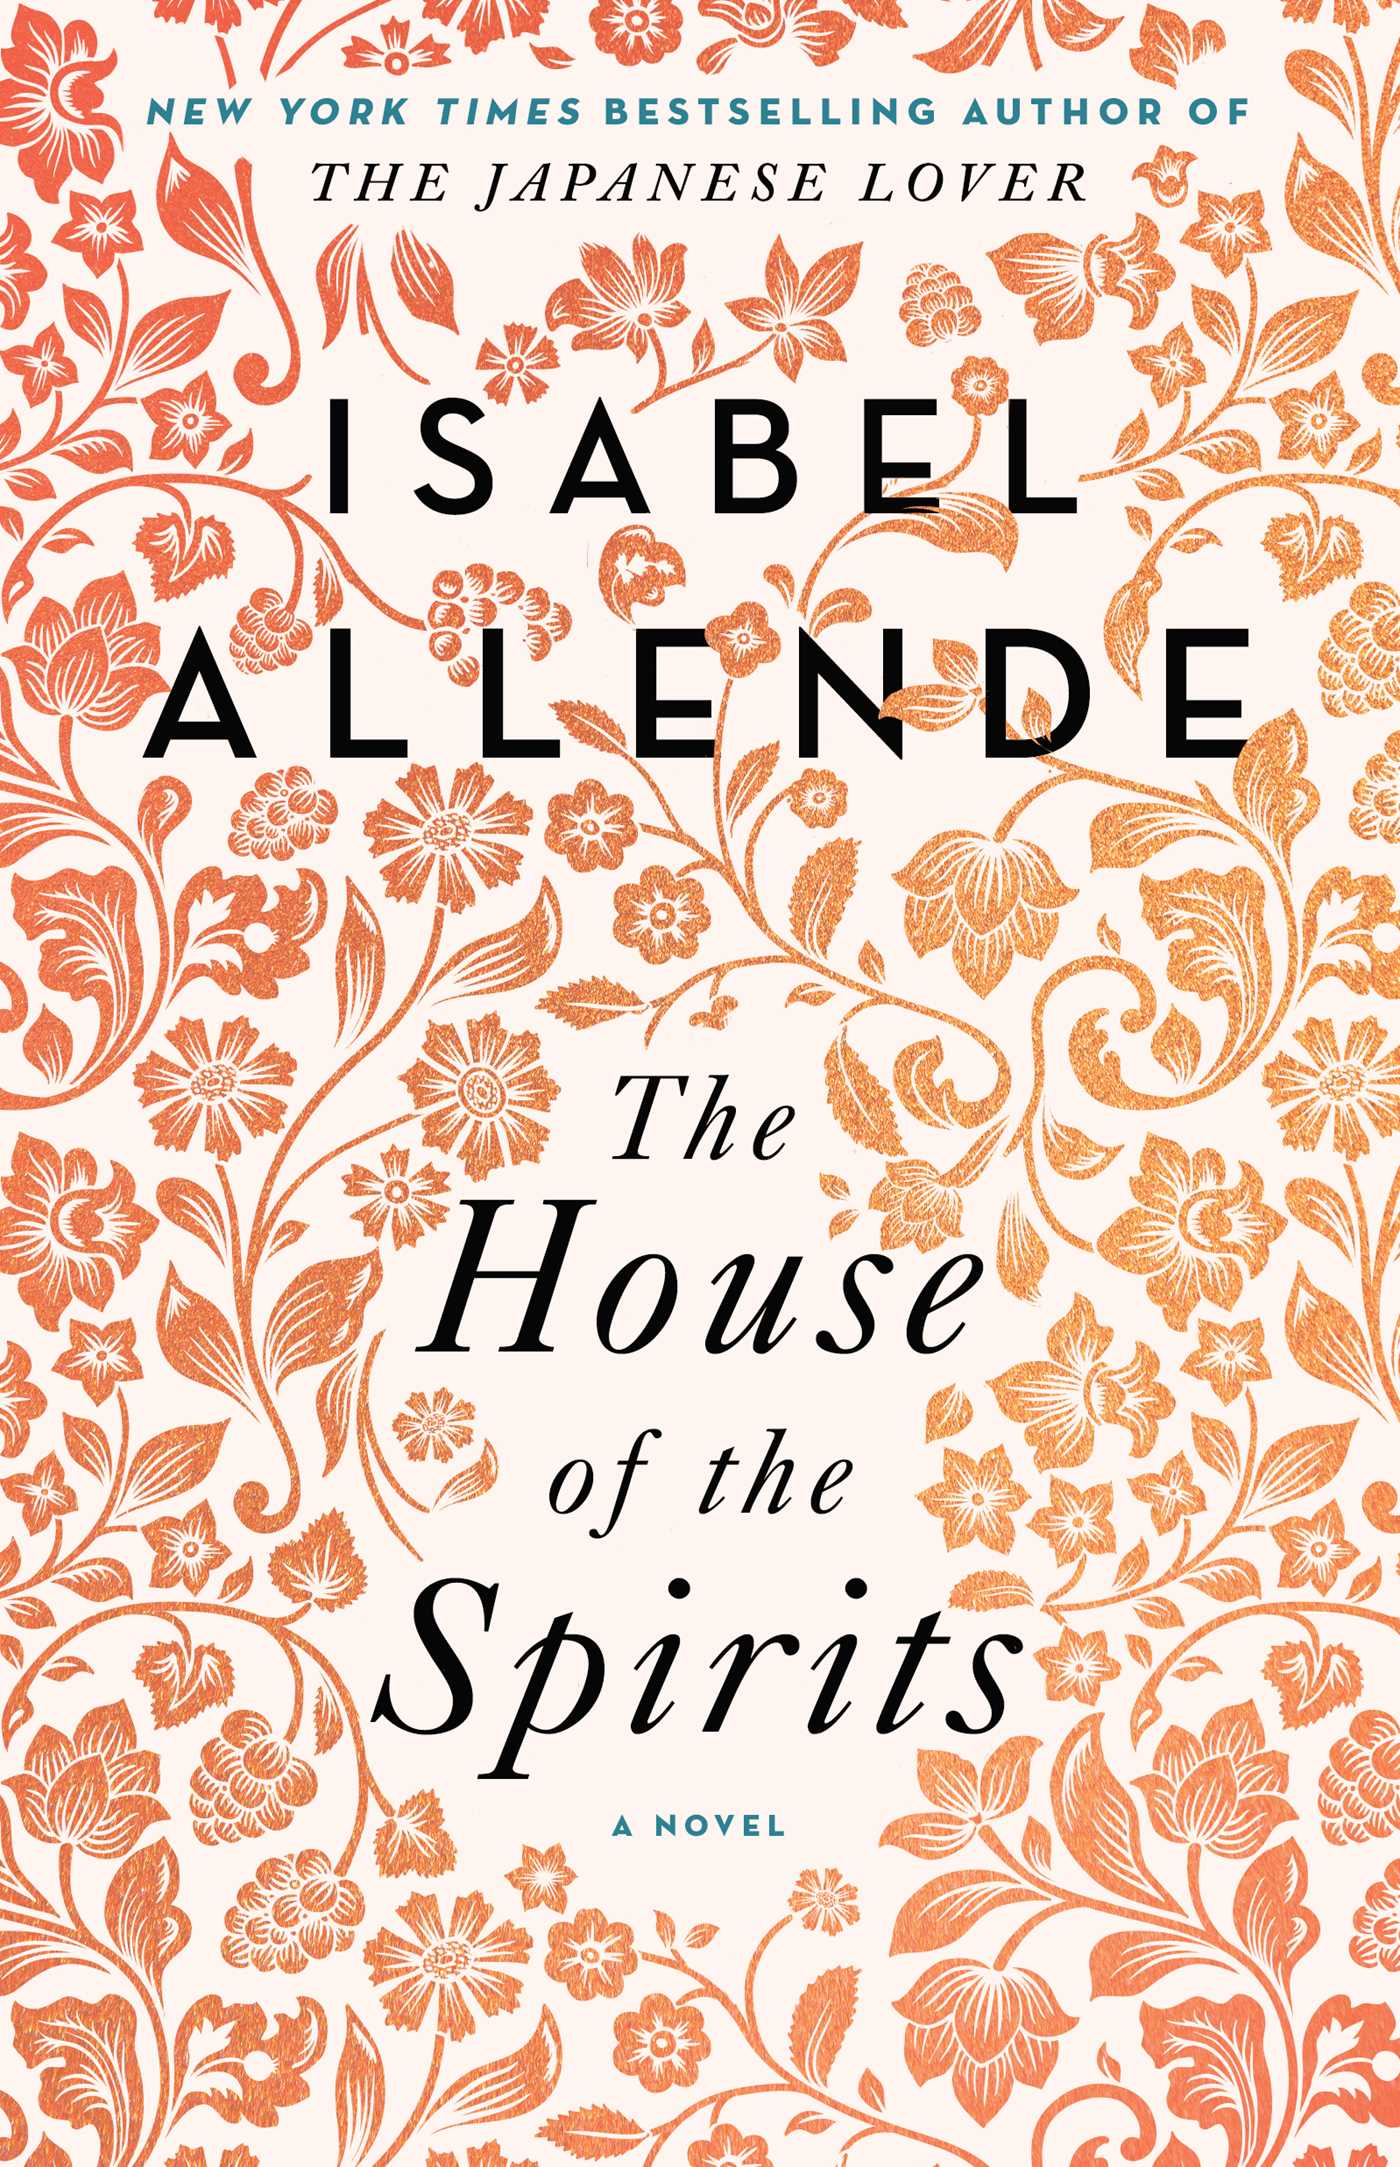 Image for "The House of the Spirits"